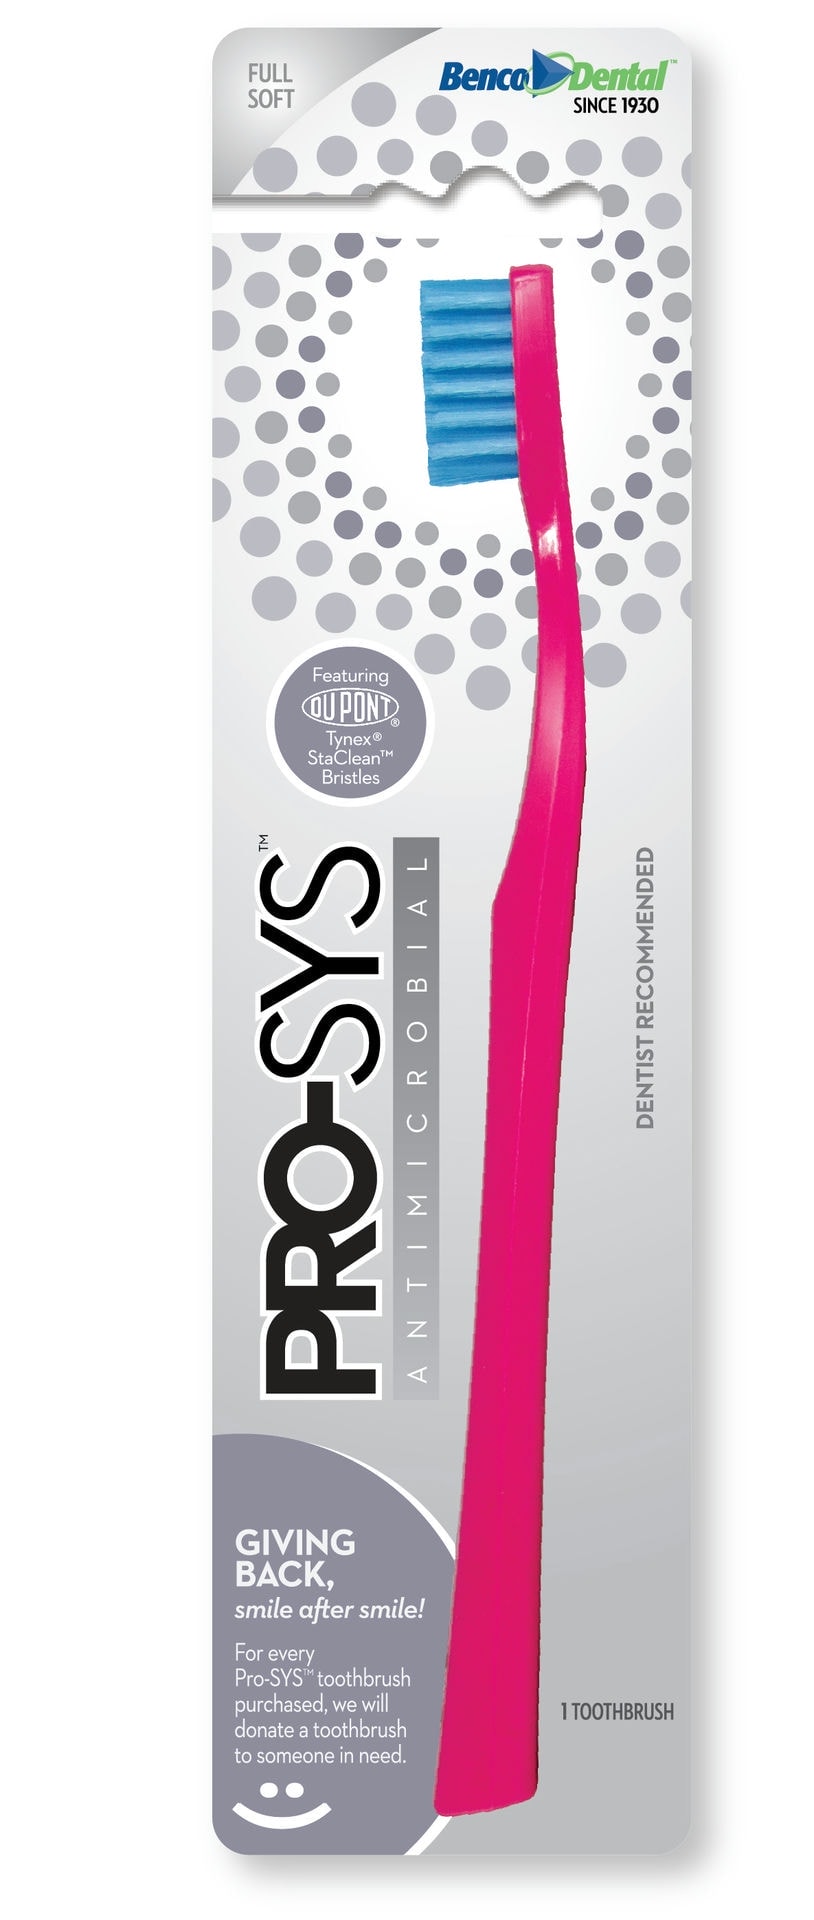 PRO-SYS adult antimicrobial toothbrush, coming soon, features bristles of DuPont™ Tynex® StaClean™ which contain silver and zinc antimicrobial additives designed to inhibit the growth of micro-organisms (bacteria, fungi and yeast).